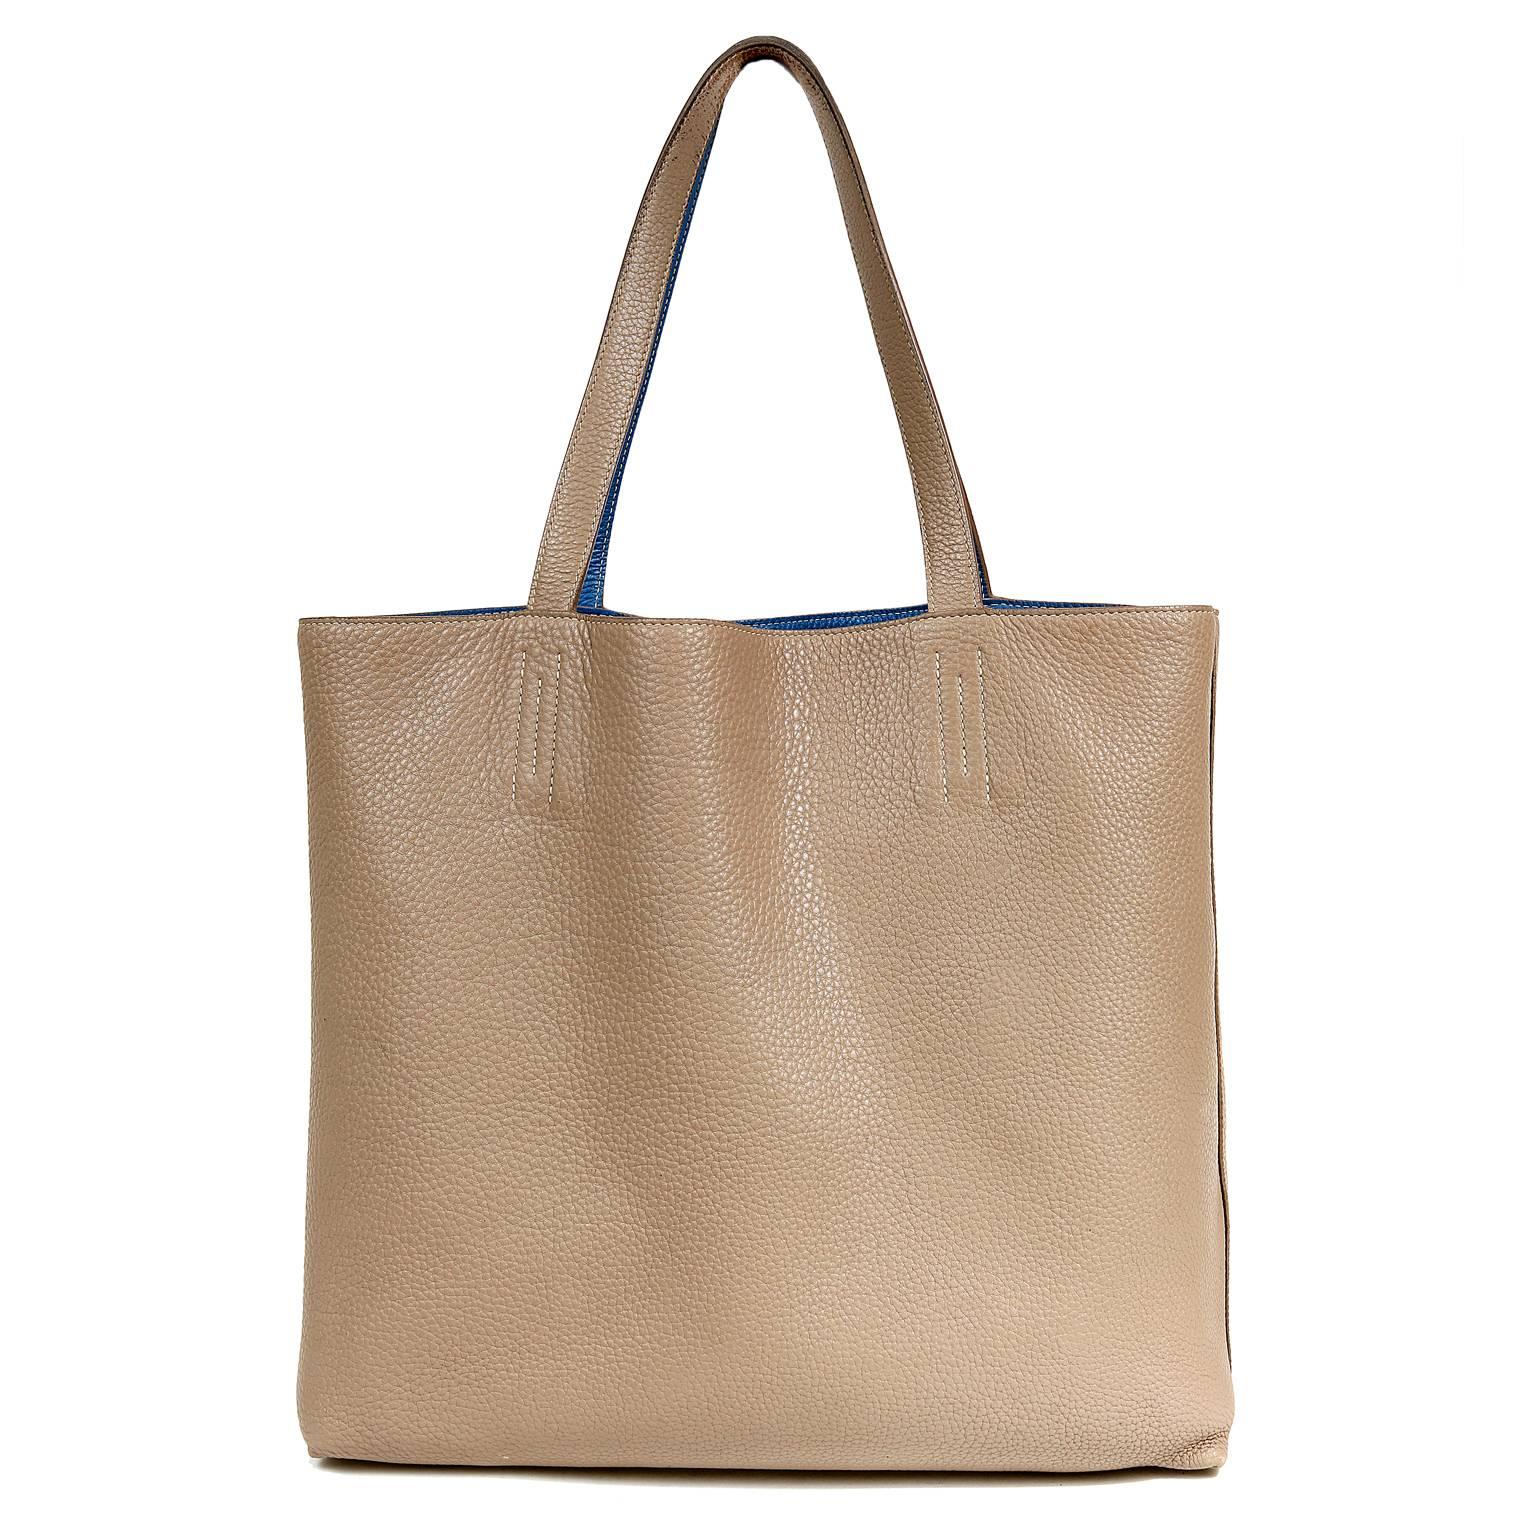 Hermès Blue Jean and Etoupe Double Sens PM Tote- EXCELLENT condition  The current style is very versatile thanks to its reversible nature.

Blue Jean and neutral Etoupe large tote is created in Clemence leather.    Textured and scratch resistant,